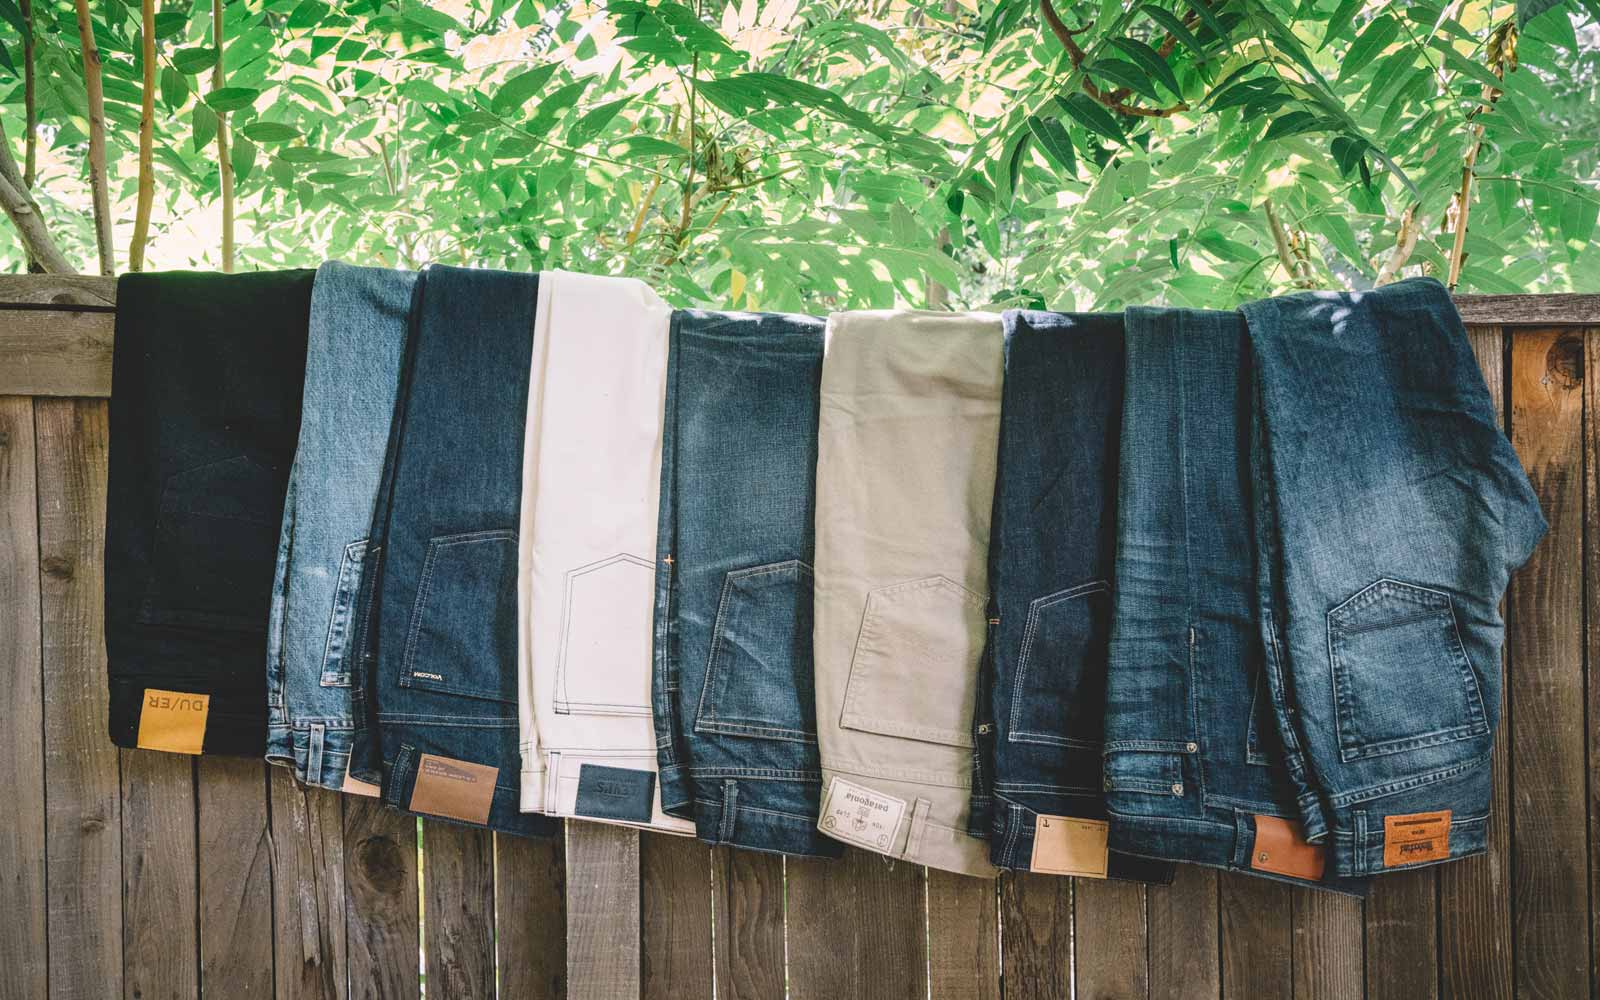 A Pants-Size Comparison: Investigation Revisited - The GentleManual